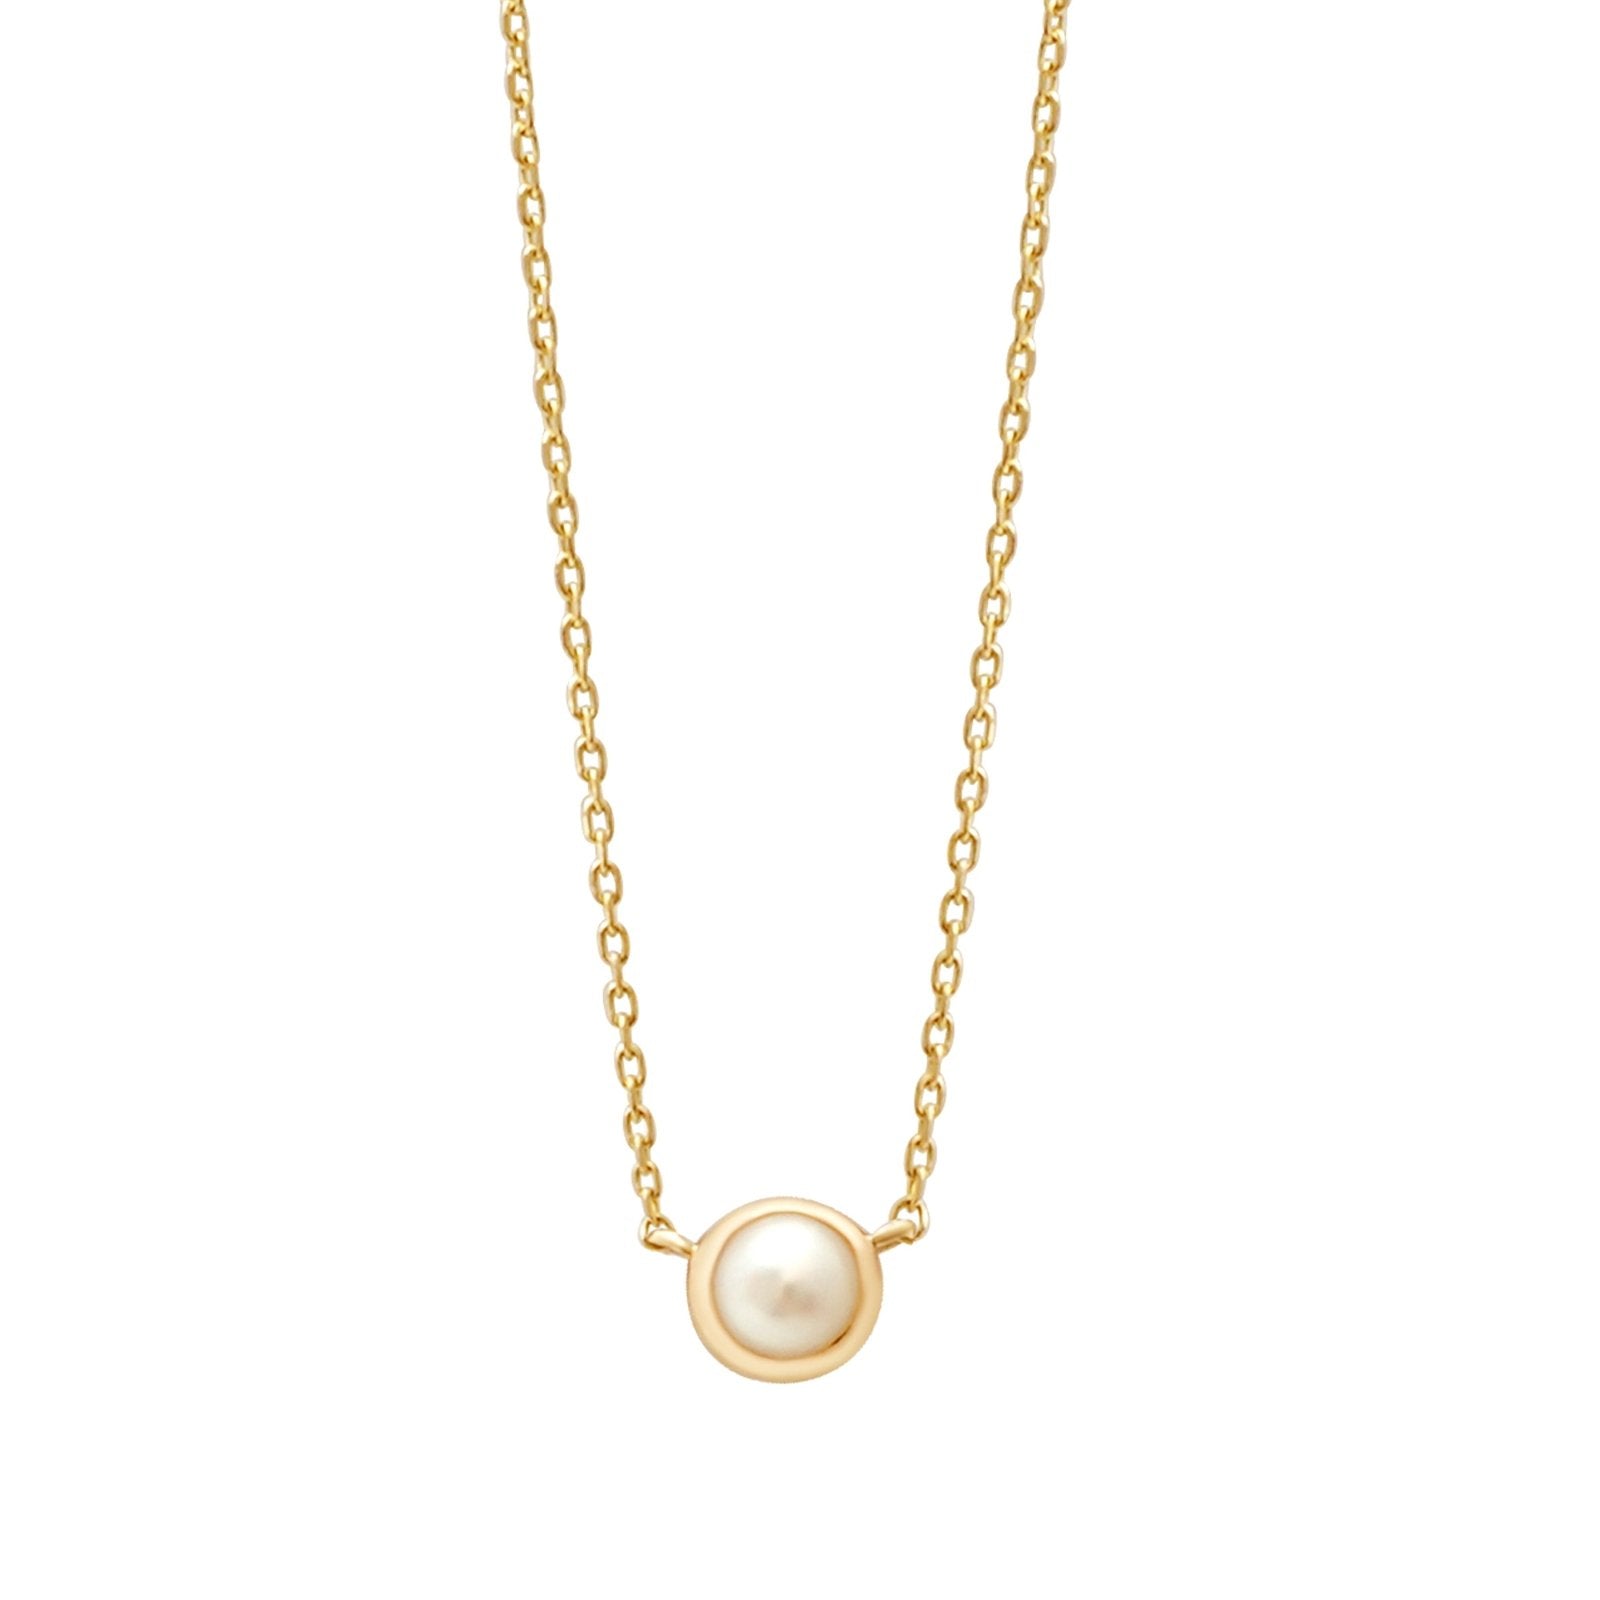 Freshwater Pearl Station Necklace Necklaces Estella Collection 18411 14k Birthstone Gemstone #tag4# #tag5# #tag6# #tag7# #tag8# #tag9# #tag10# 14K Yellow Gold 3MM